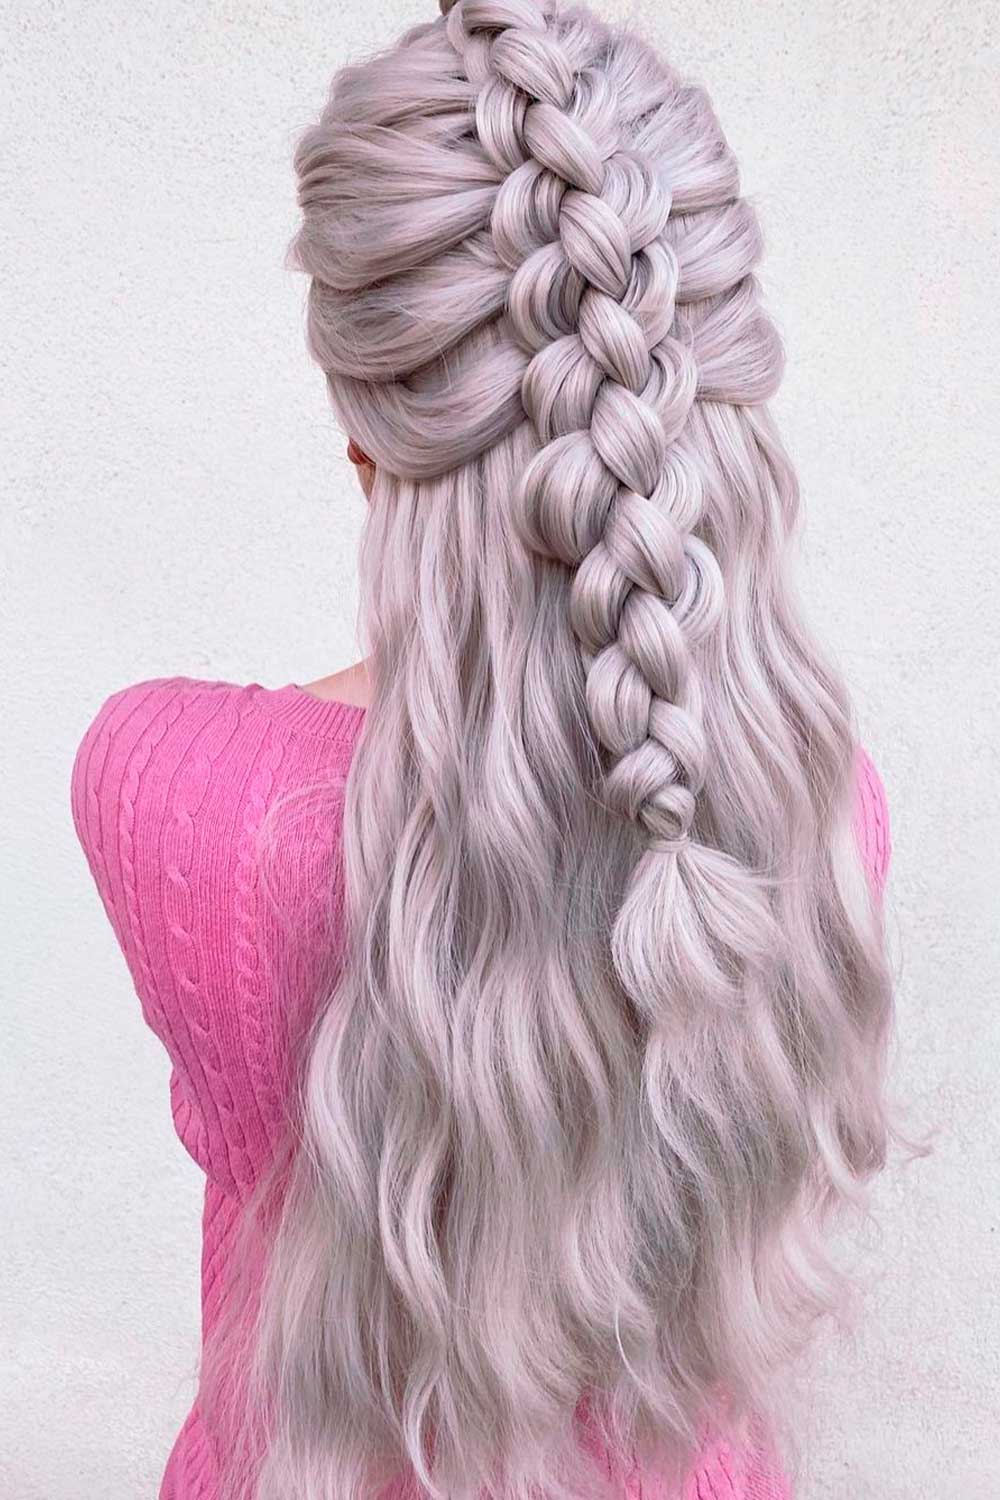 Braided Half Up Hairstyles For Christmas Party